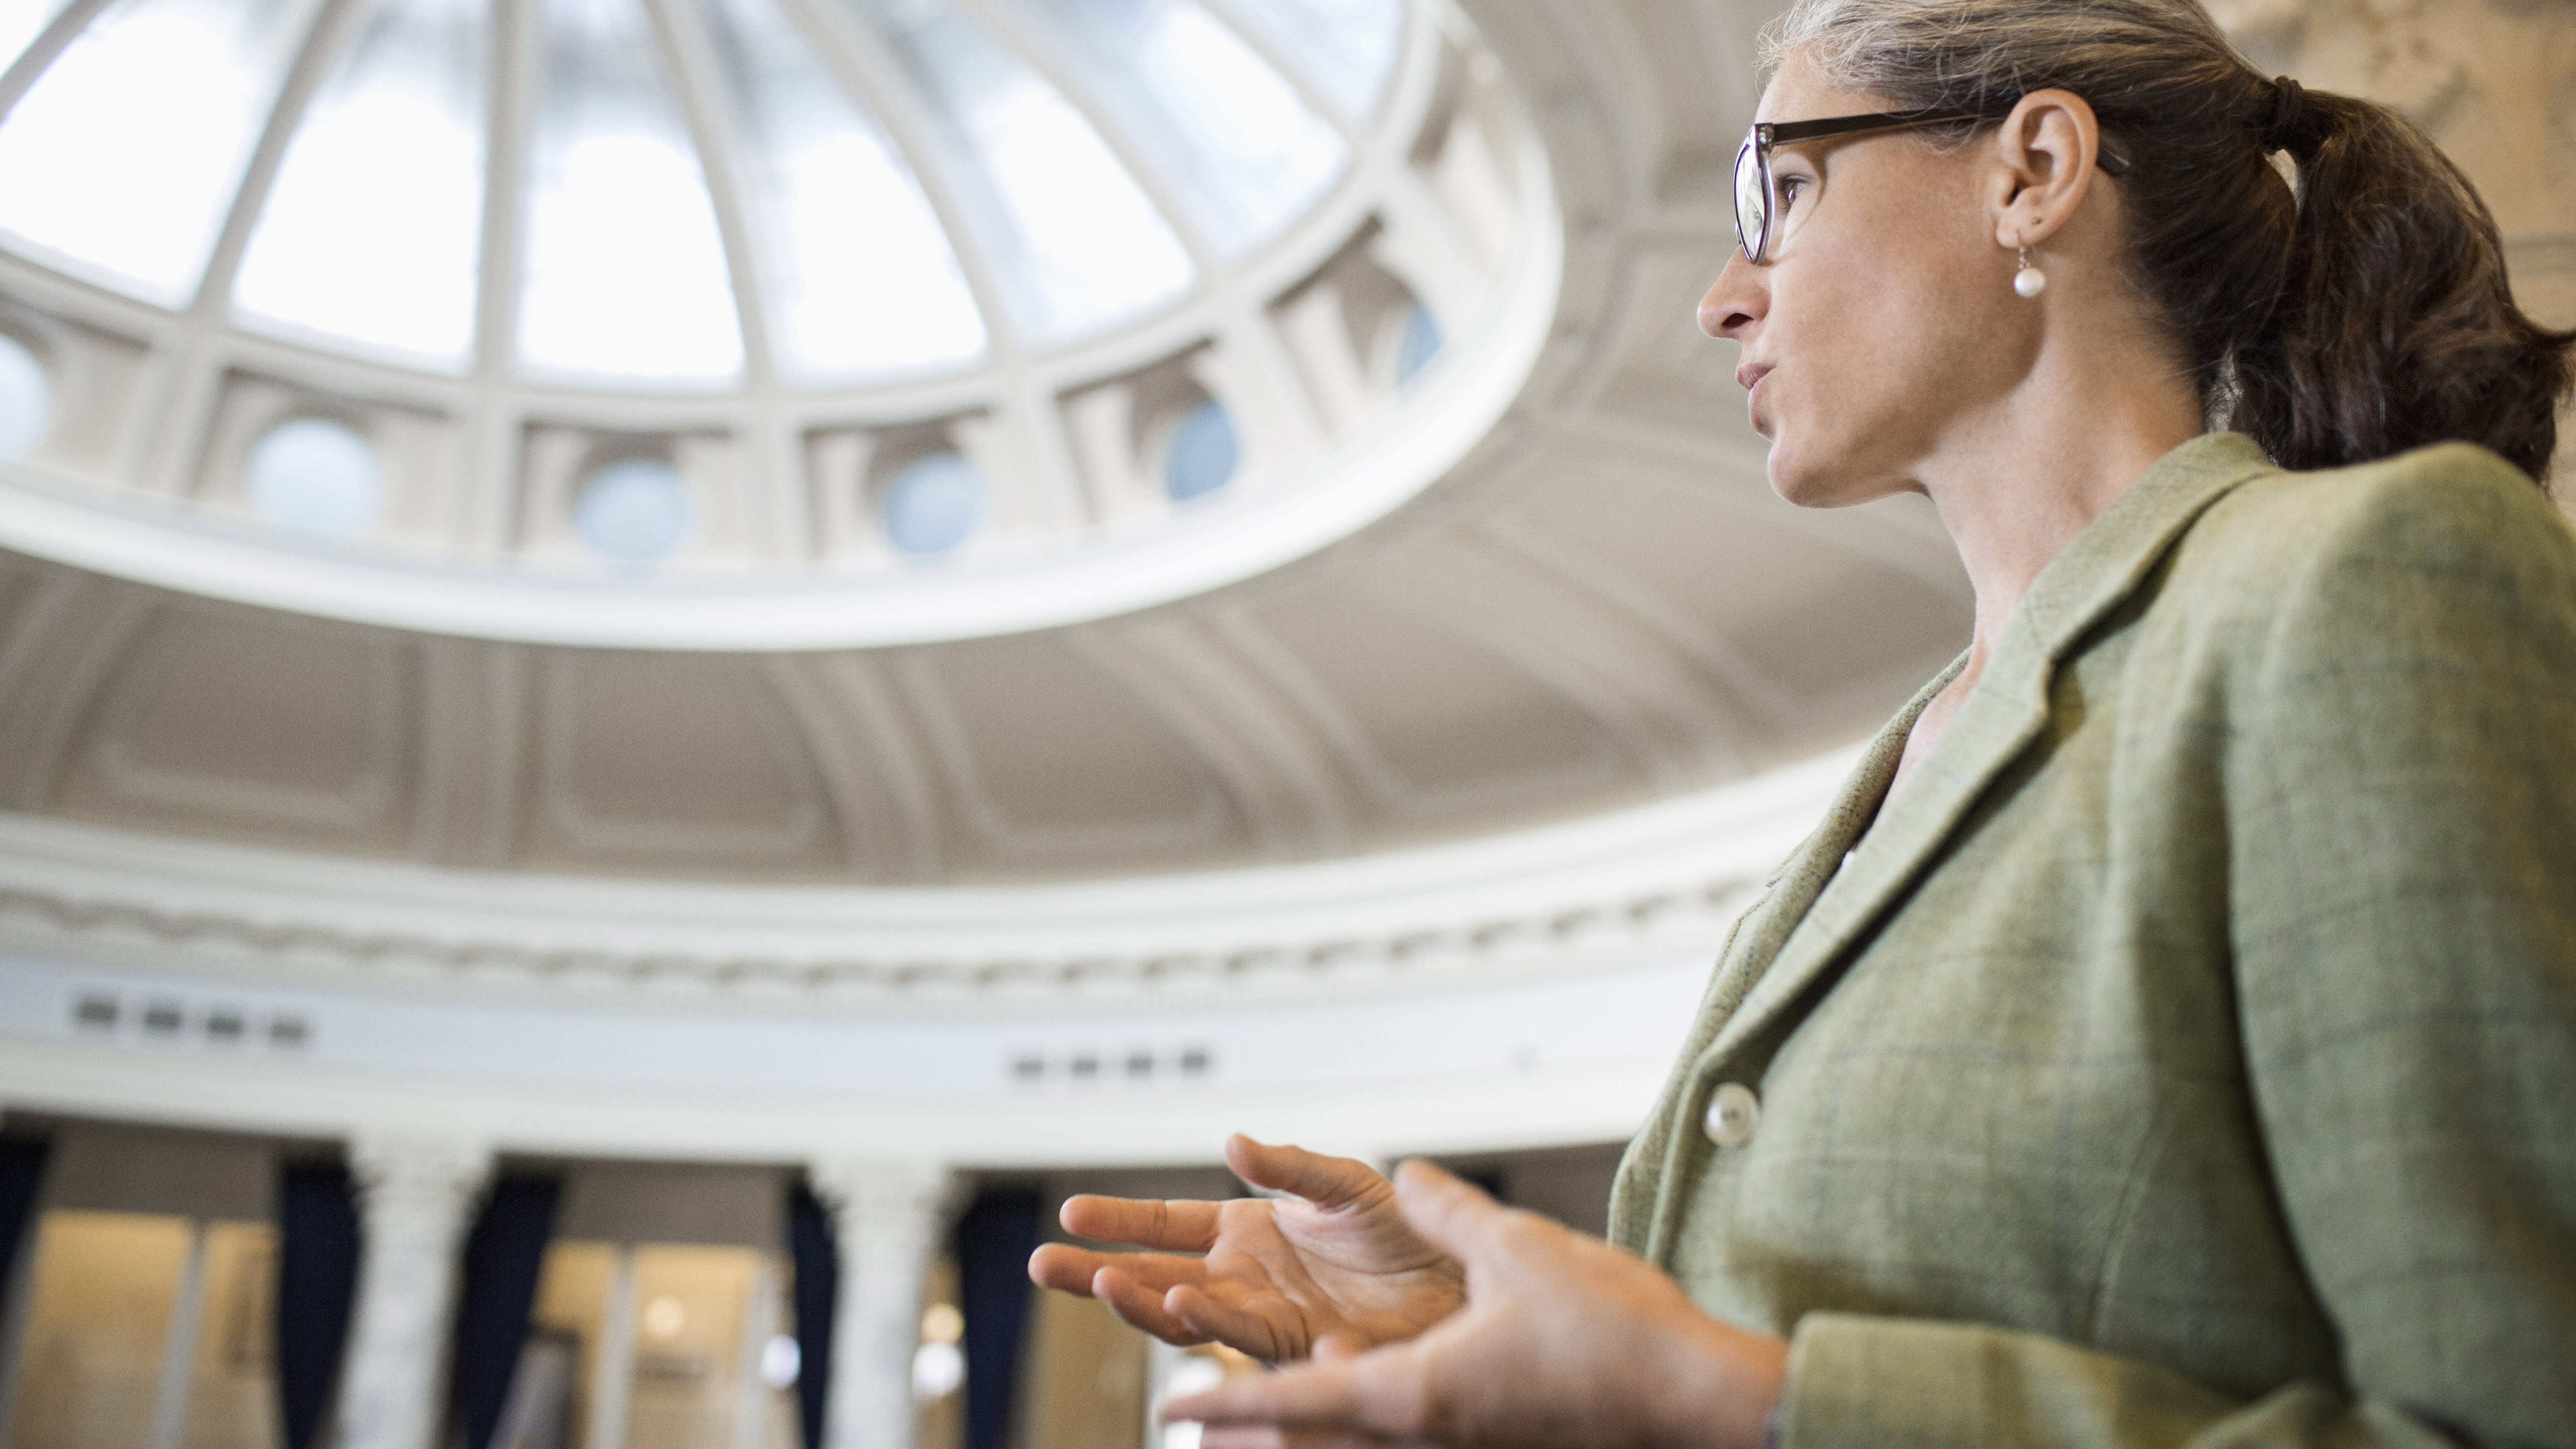 A person speaks in the rotunda of a government building.